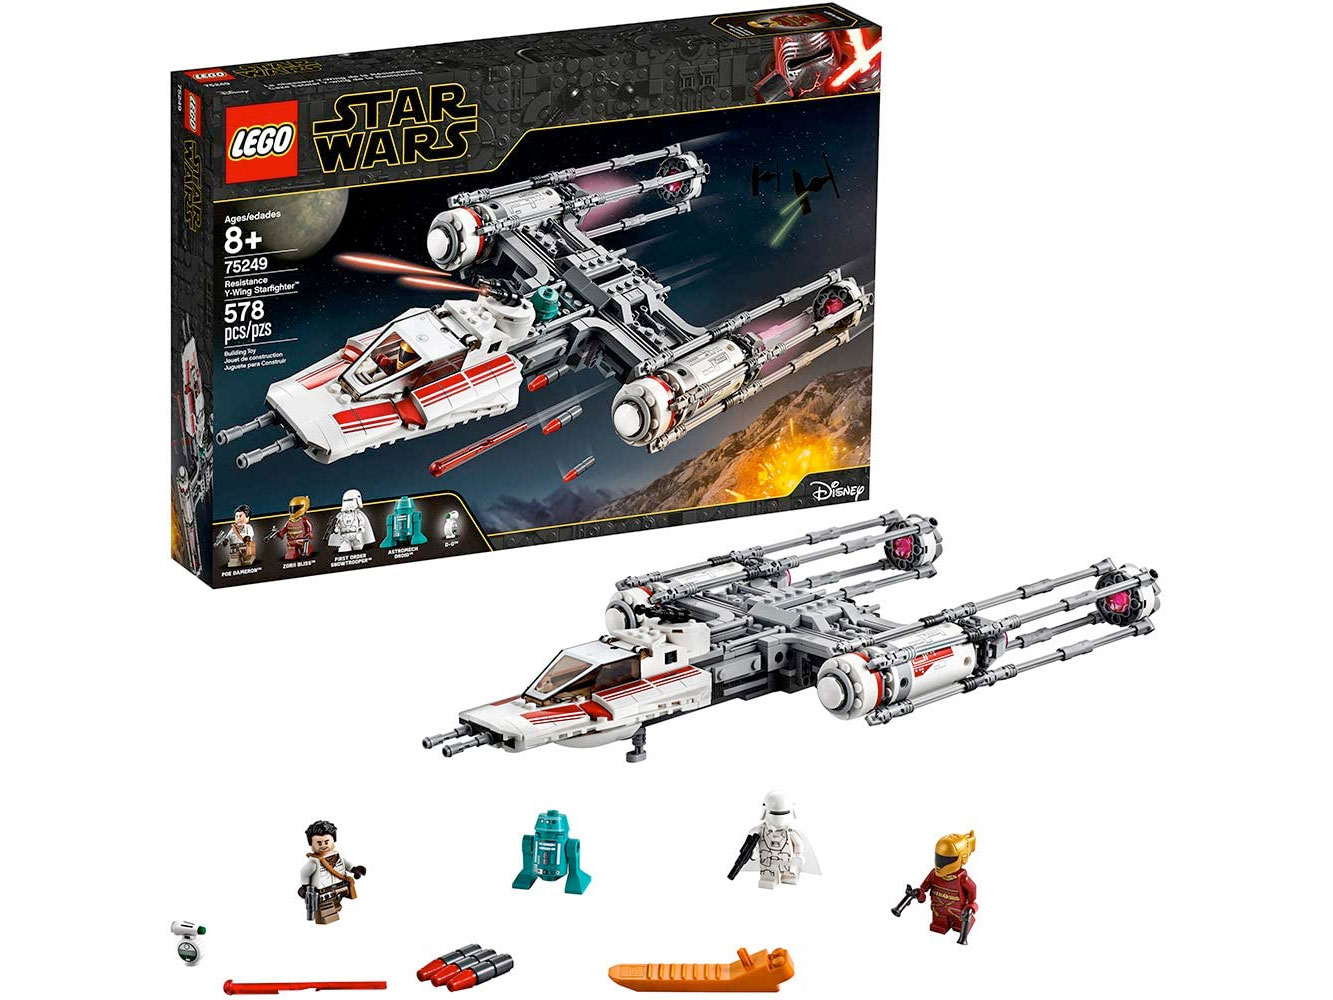 Amazon：LEGO Star Wars: The Rise of Skywalker Resistance Y-Wing Starfighter 75249 (578 pcs)只卖$62.96